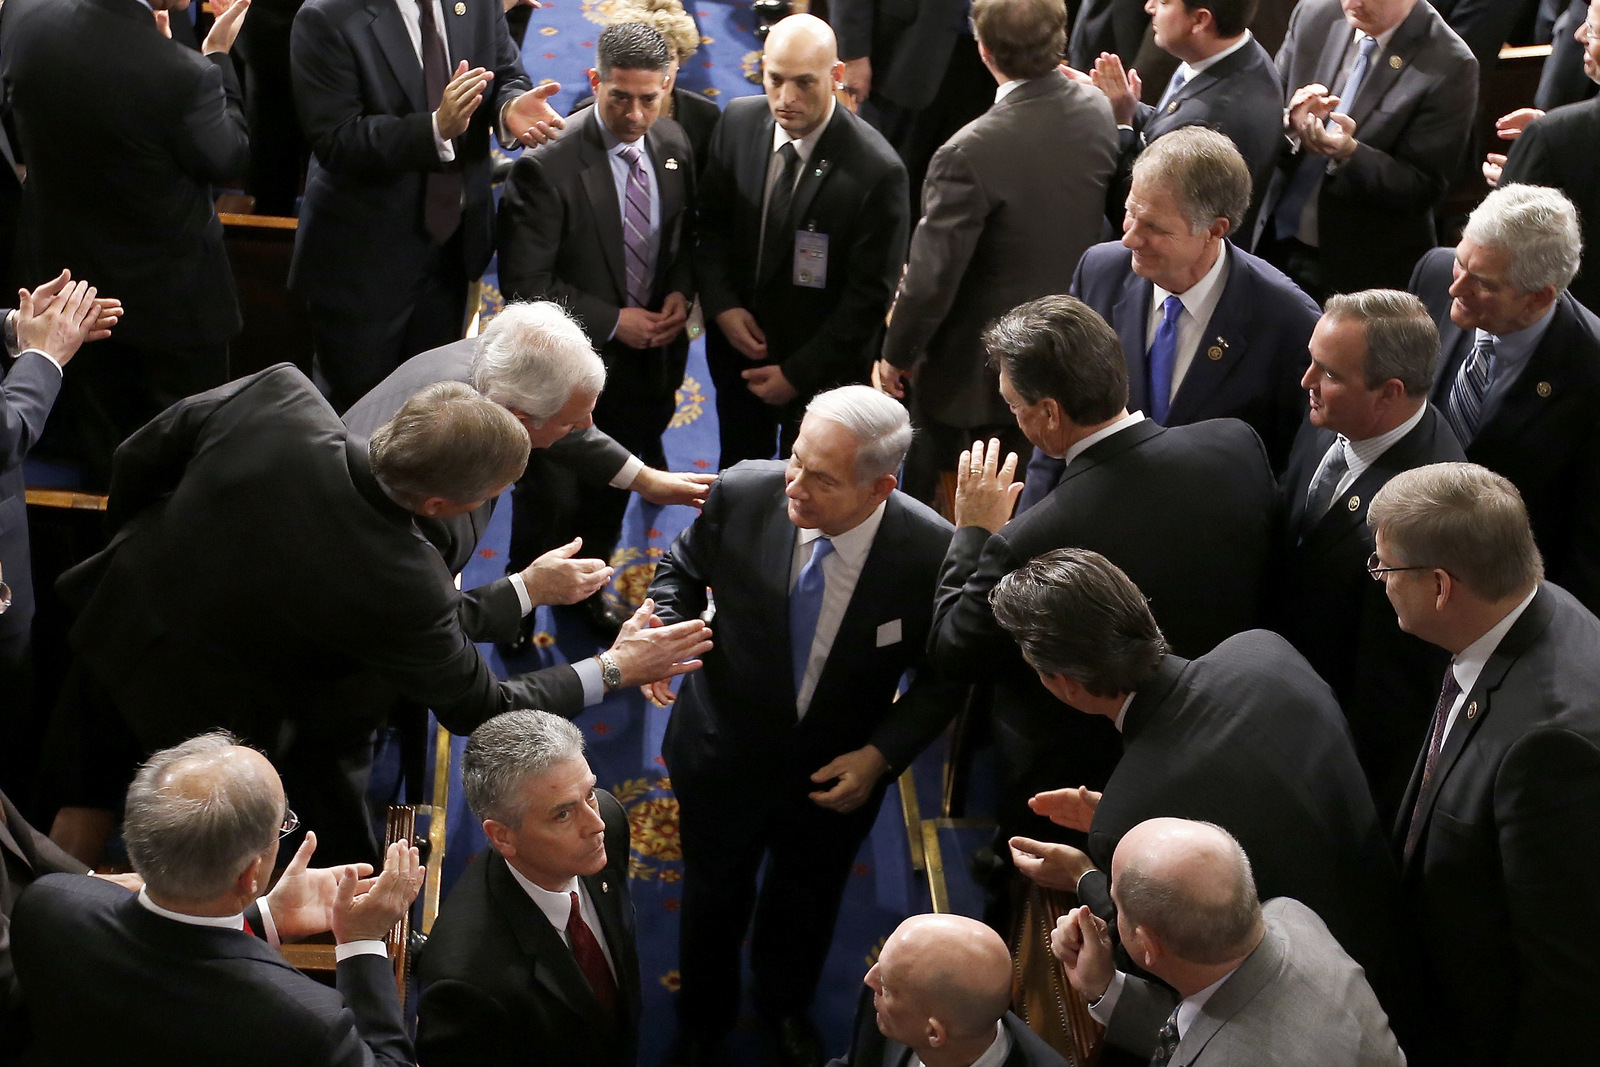 Members of Congress rush to greet Israeli Prime Minister Benjamin Netanyahu as he leaves the House chamber on Capitol Hill in Washington, Tuesday, March 3, 2015, after lobbying Congress to kill a peace plan with Iran at all costs. Studies show that more than half of Congress will themselves go on to become lobbyists. (AP Photo/Andrew Harnik)